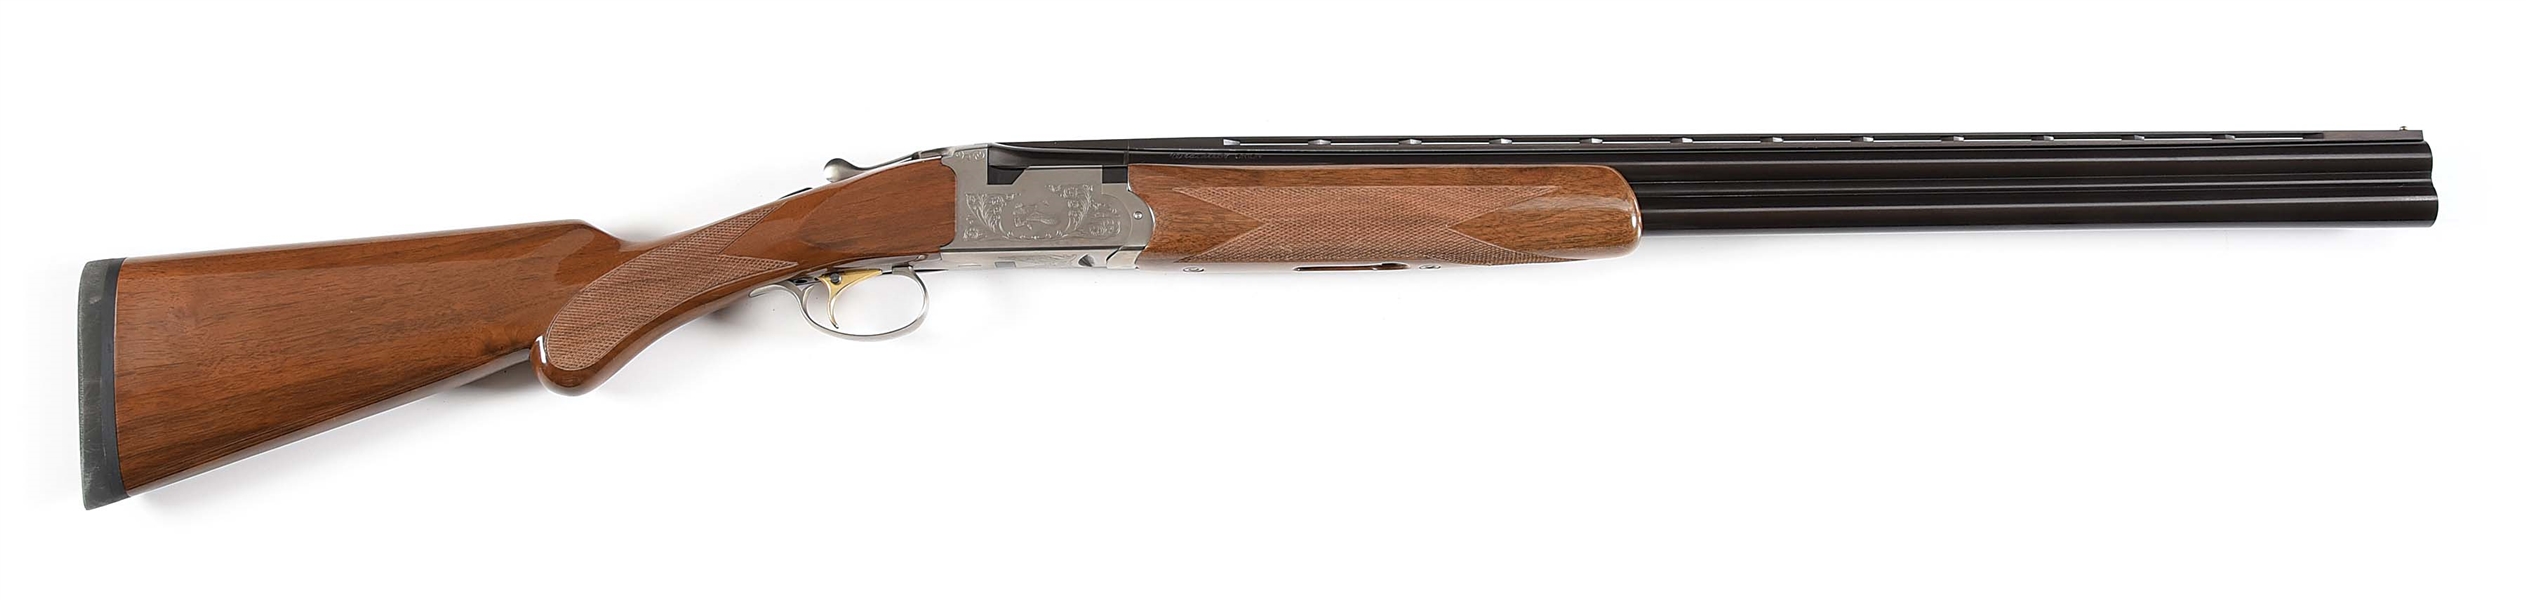 (M) WEATHERBY ORION II CLASSIC FIELD OVER-UNDER SHOTGUN